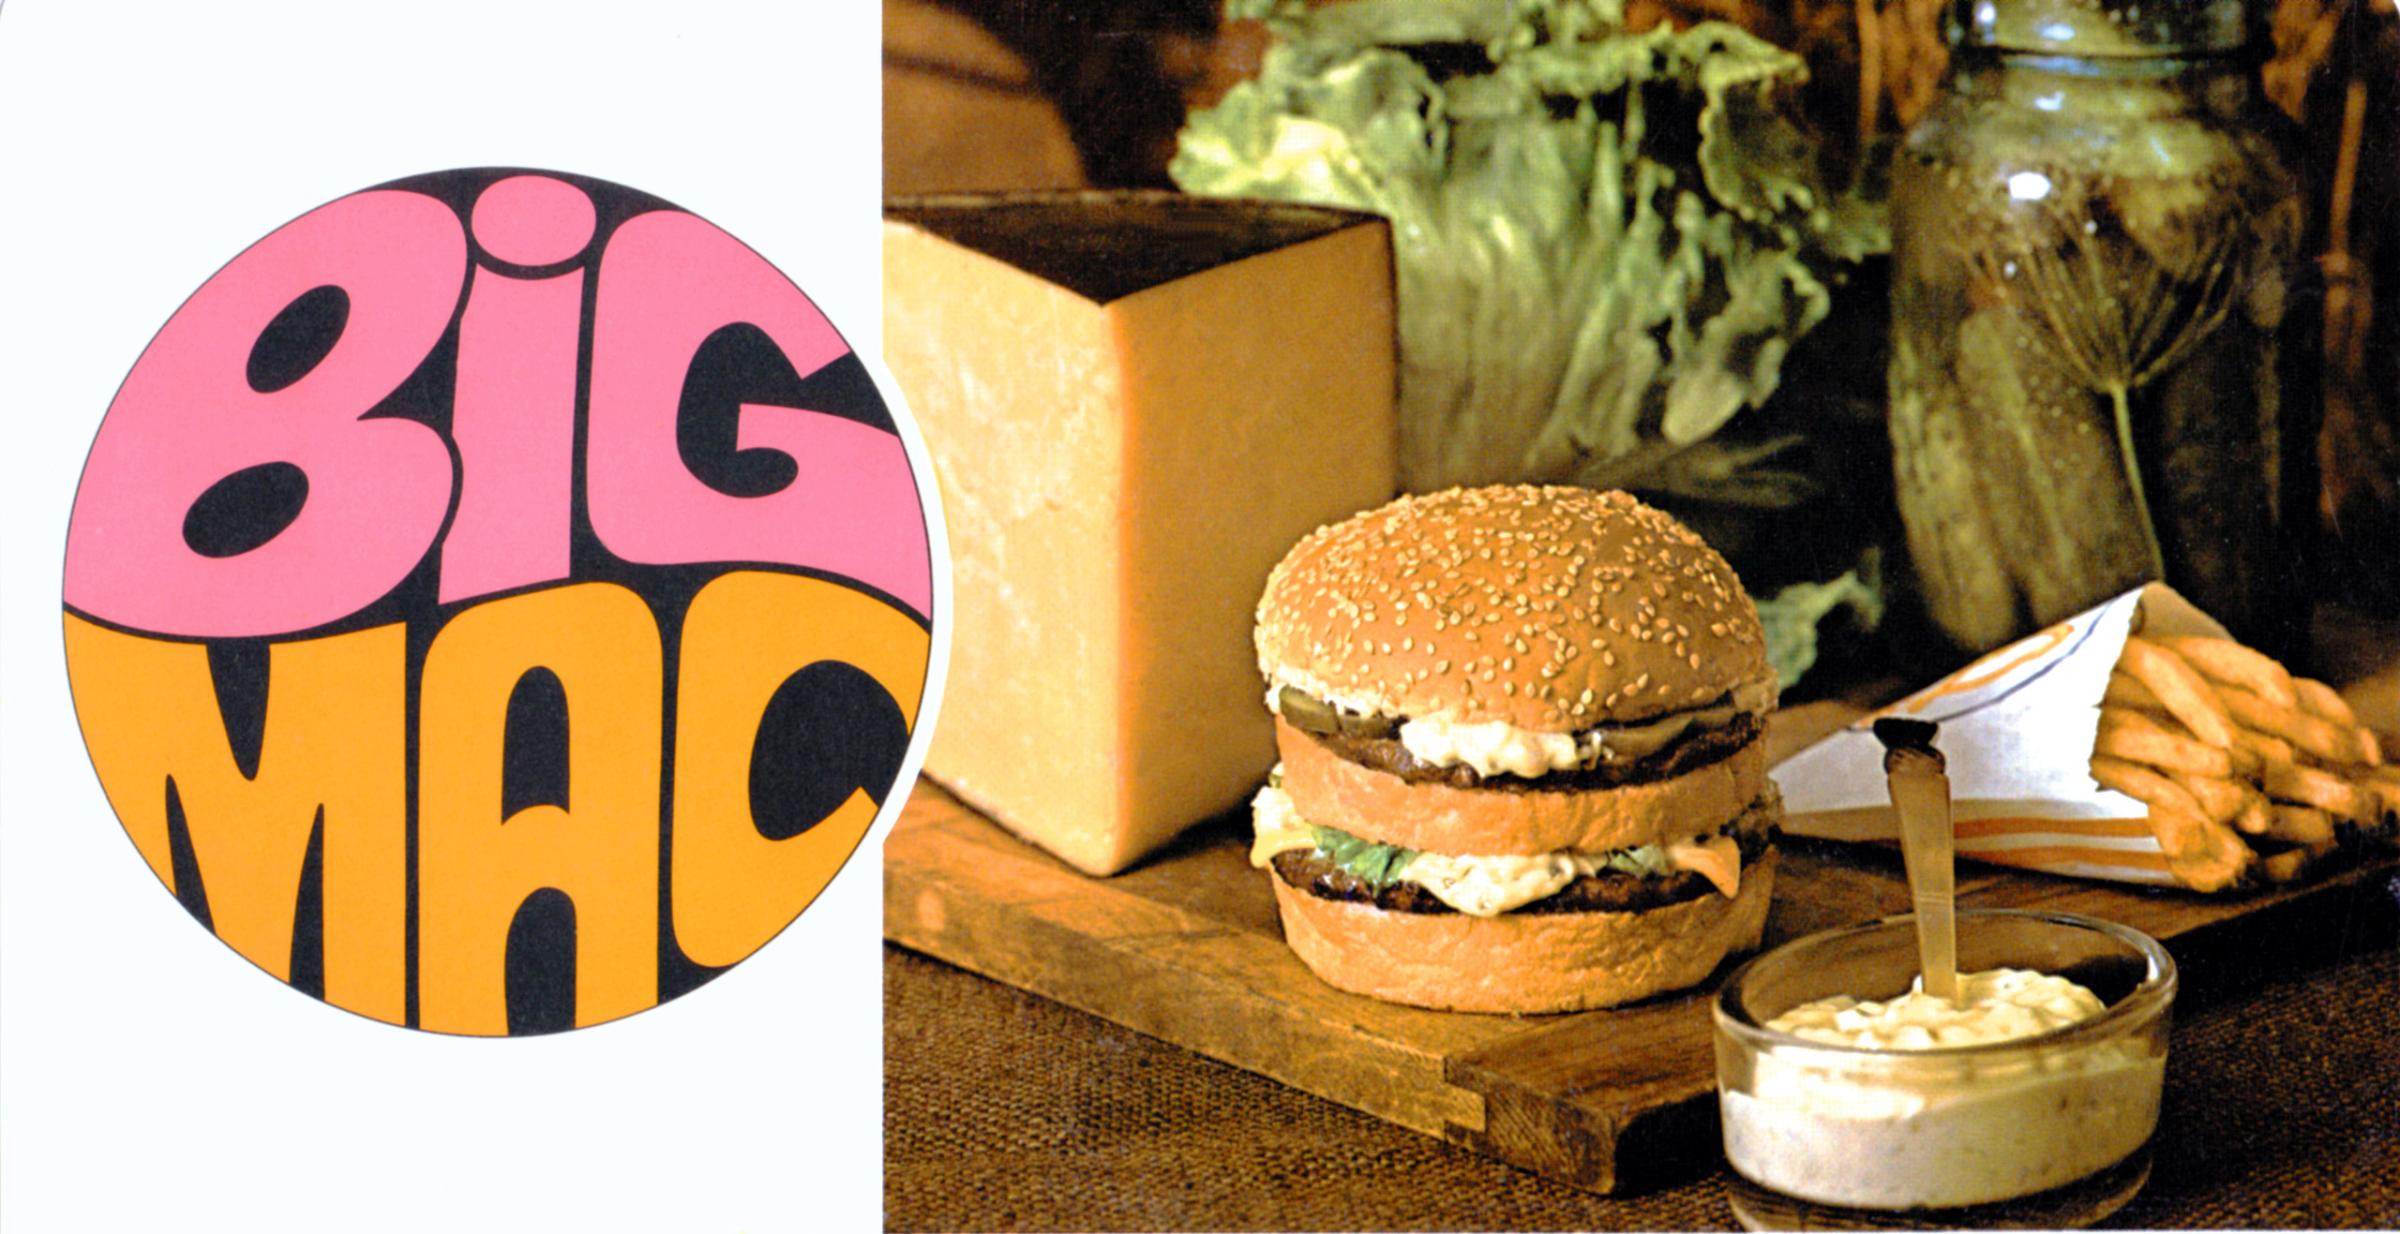 The Big Mac Debuts on the McDonald's Menu in 1968 Created by Owner Operator Jim Delligatti of Pittsburgh.